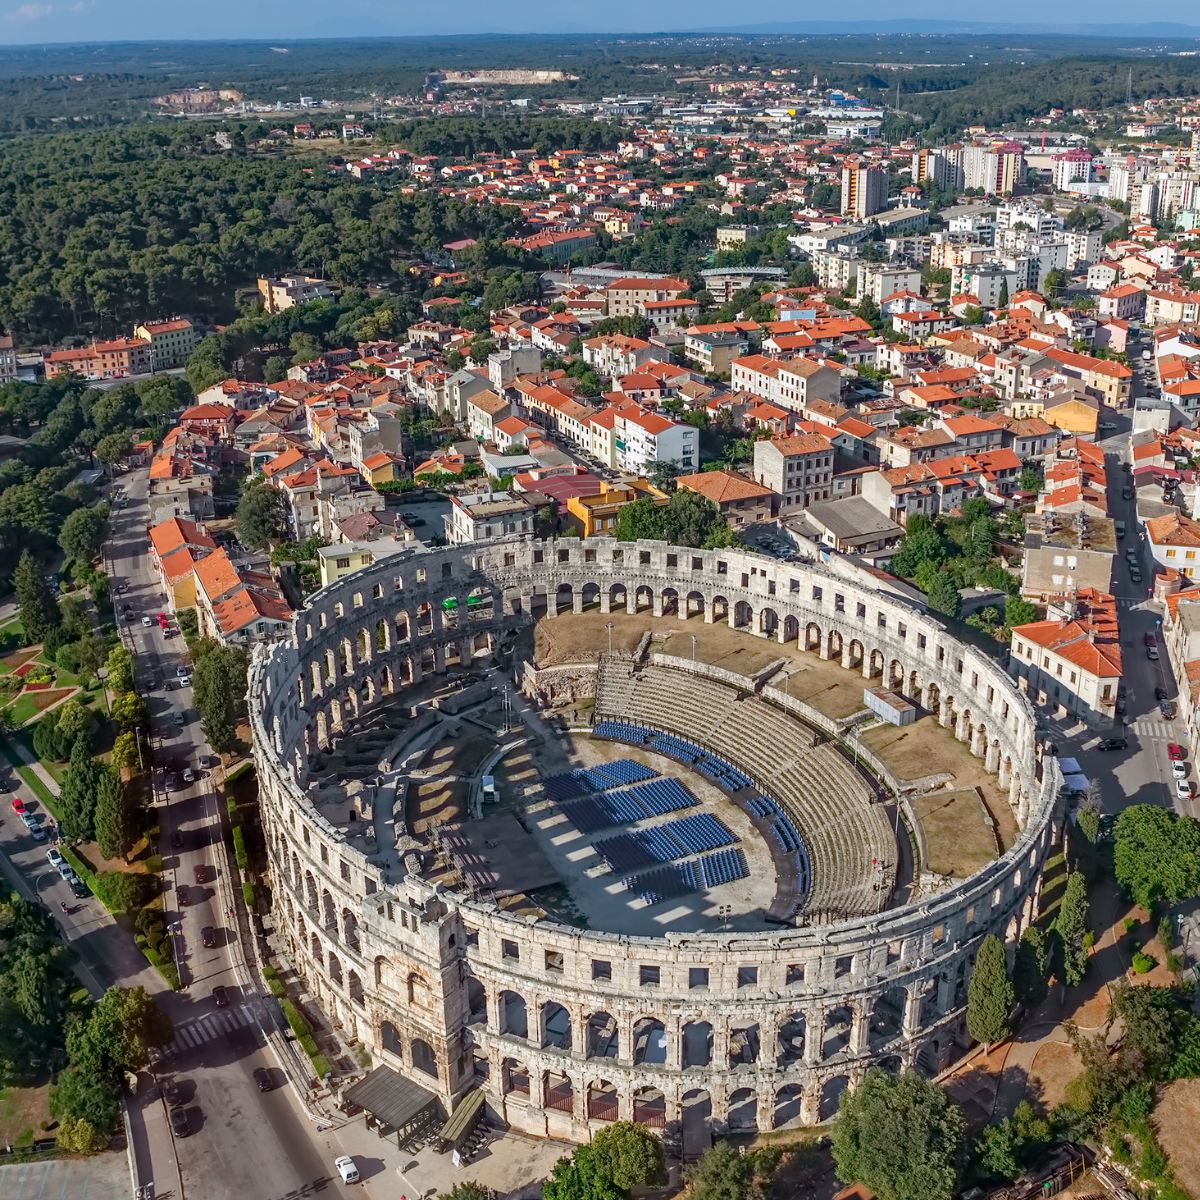 Discover a 2,000 year-old Roman Arena